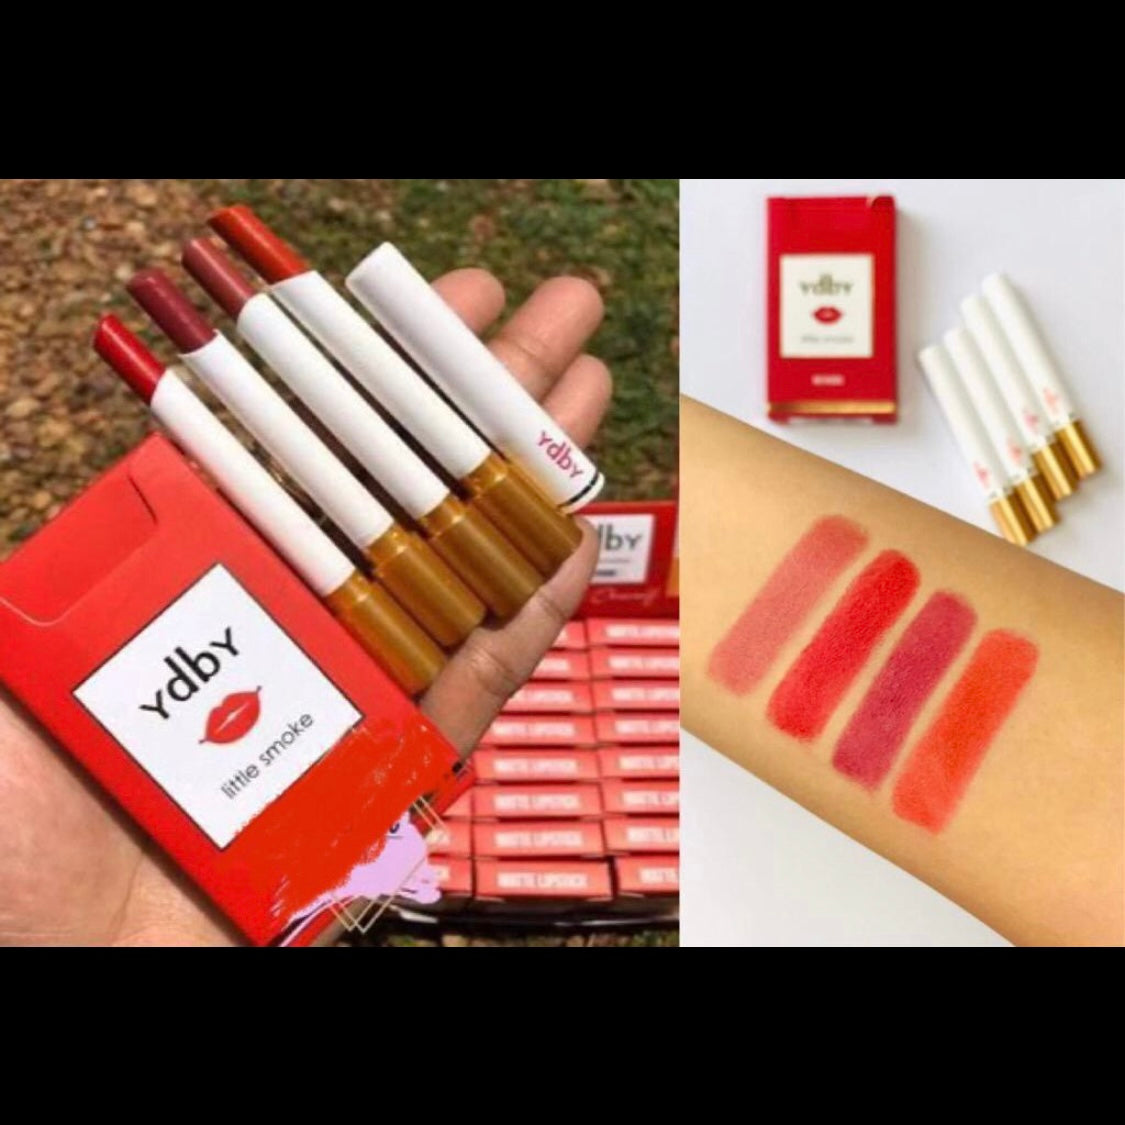 Ydby Little Smoke Lipsticks Pack Of 4 Online Makeup Store